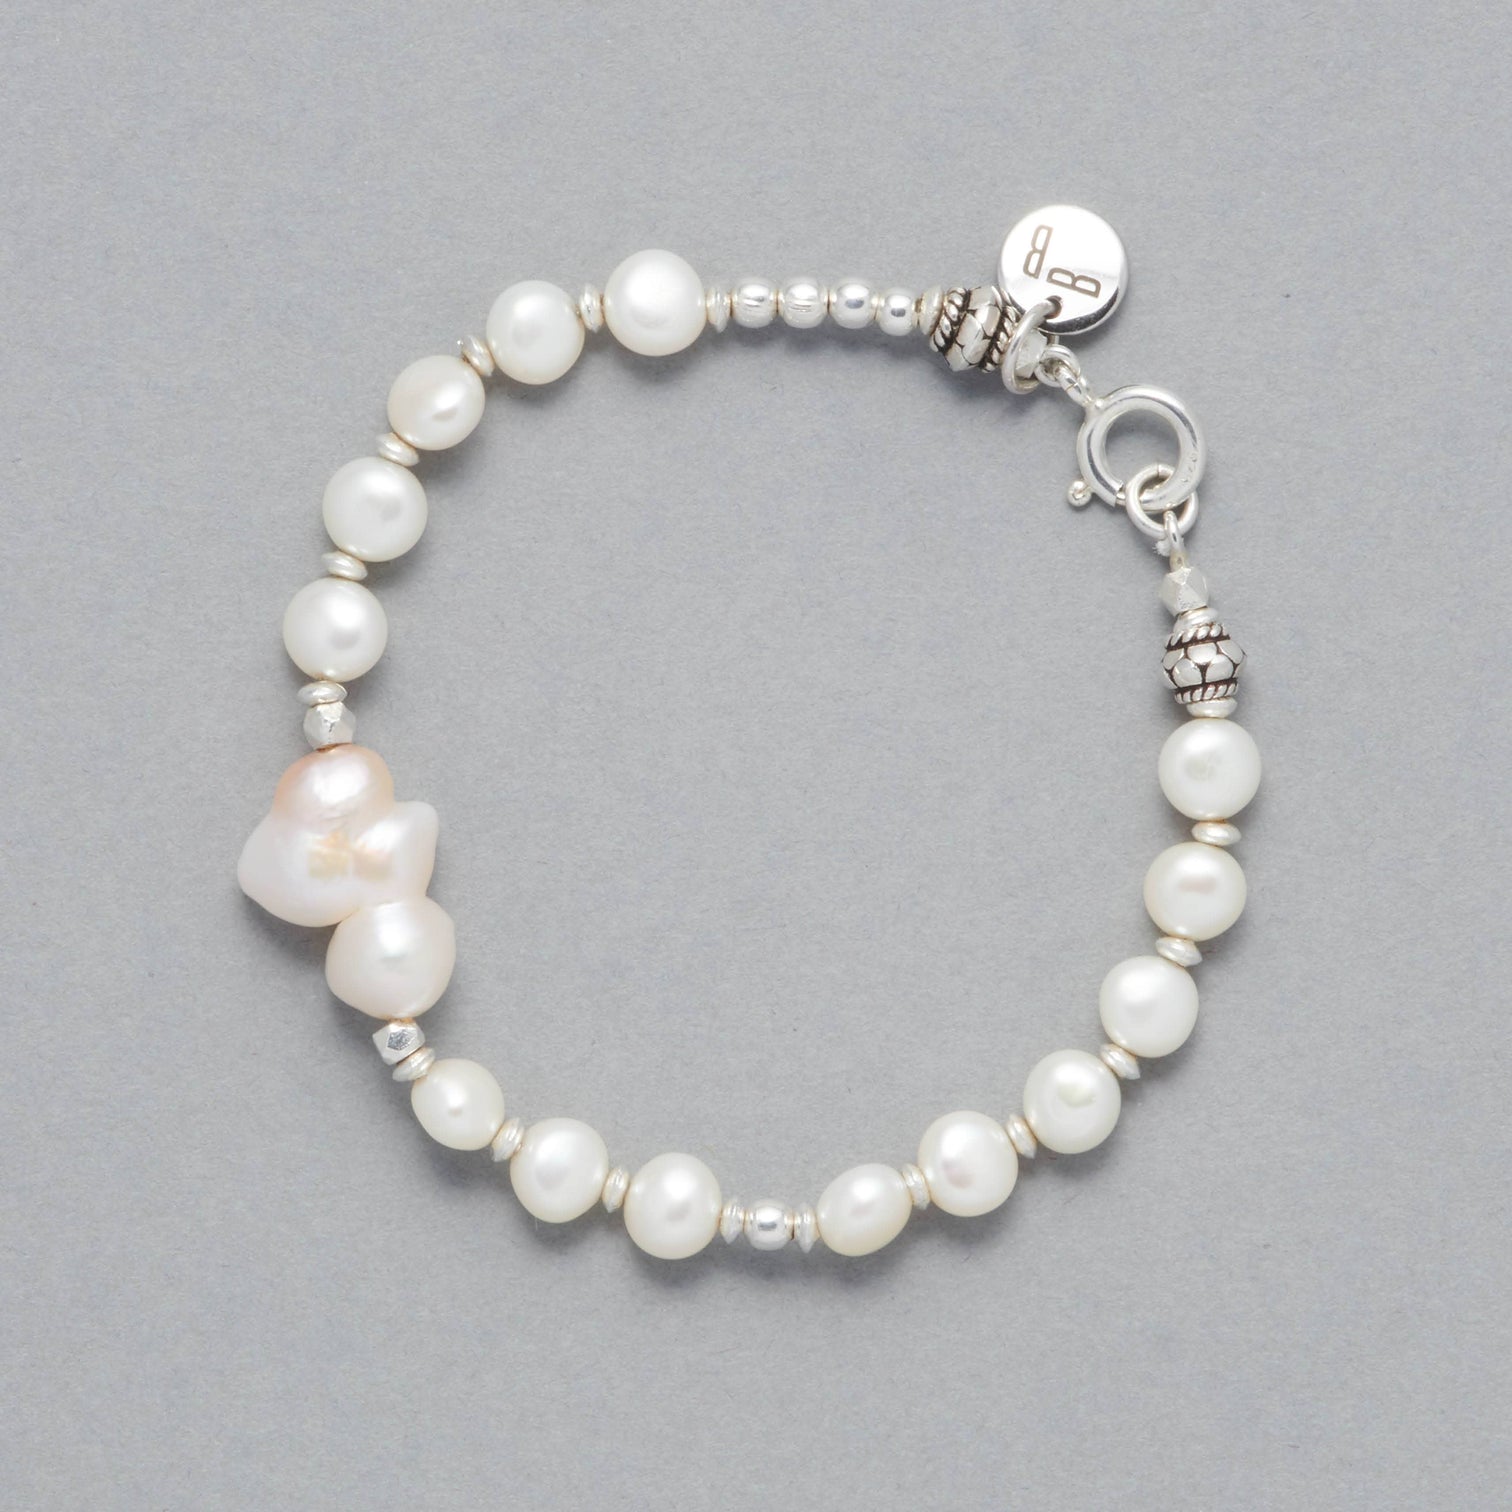 Product Shot the BIANCA Bracelet made with Cultured Freshwater White Pearls and Silver Sterling Elements. As a center-piece there is a beautiful Baroque White Pearl that is shaped like a cloud. 